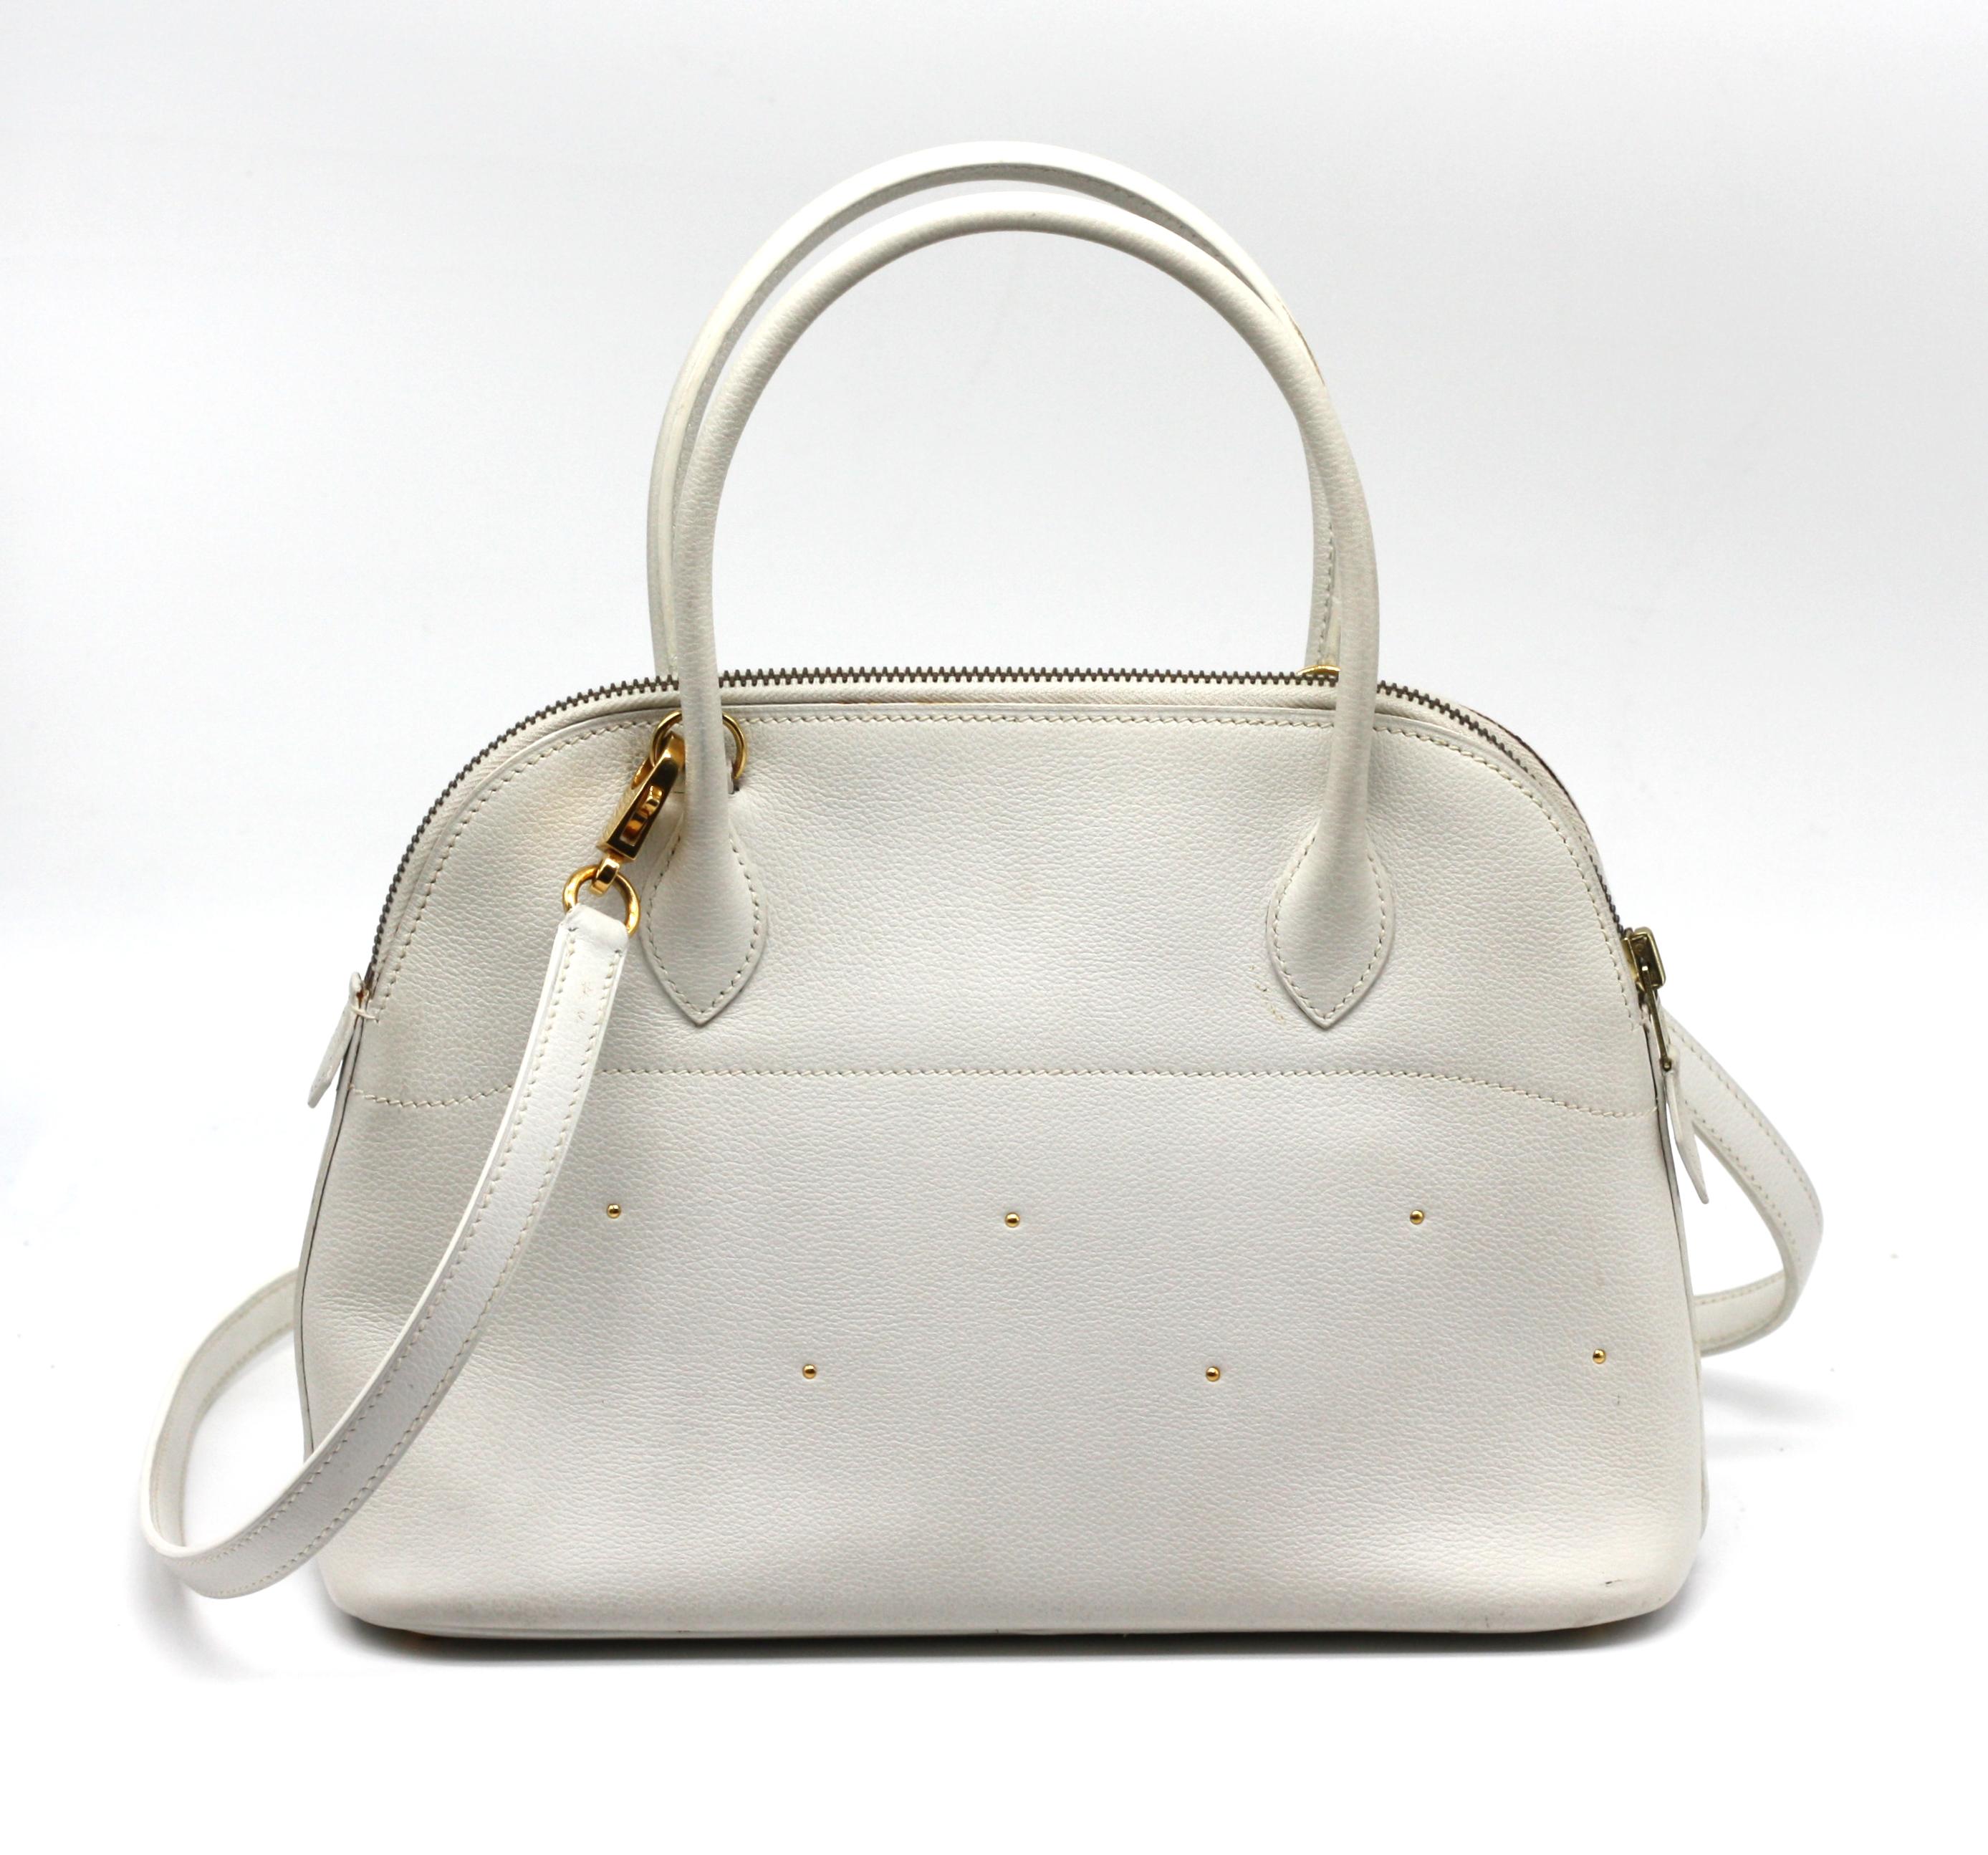  Hermes Navaho White Epsom Leather Bolide Handbag In Good Condition For Sale In West Palm Beach, FL